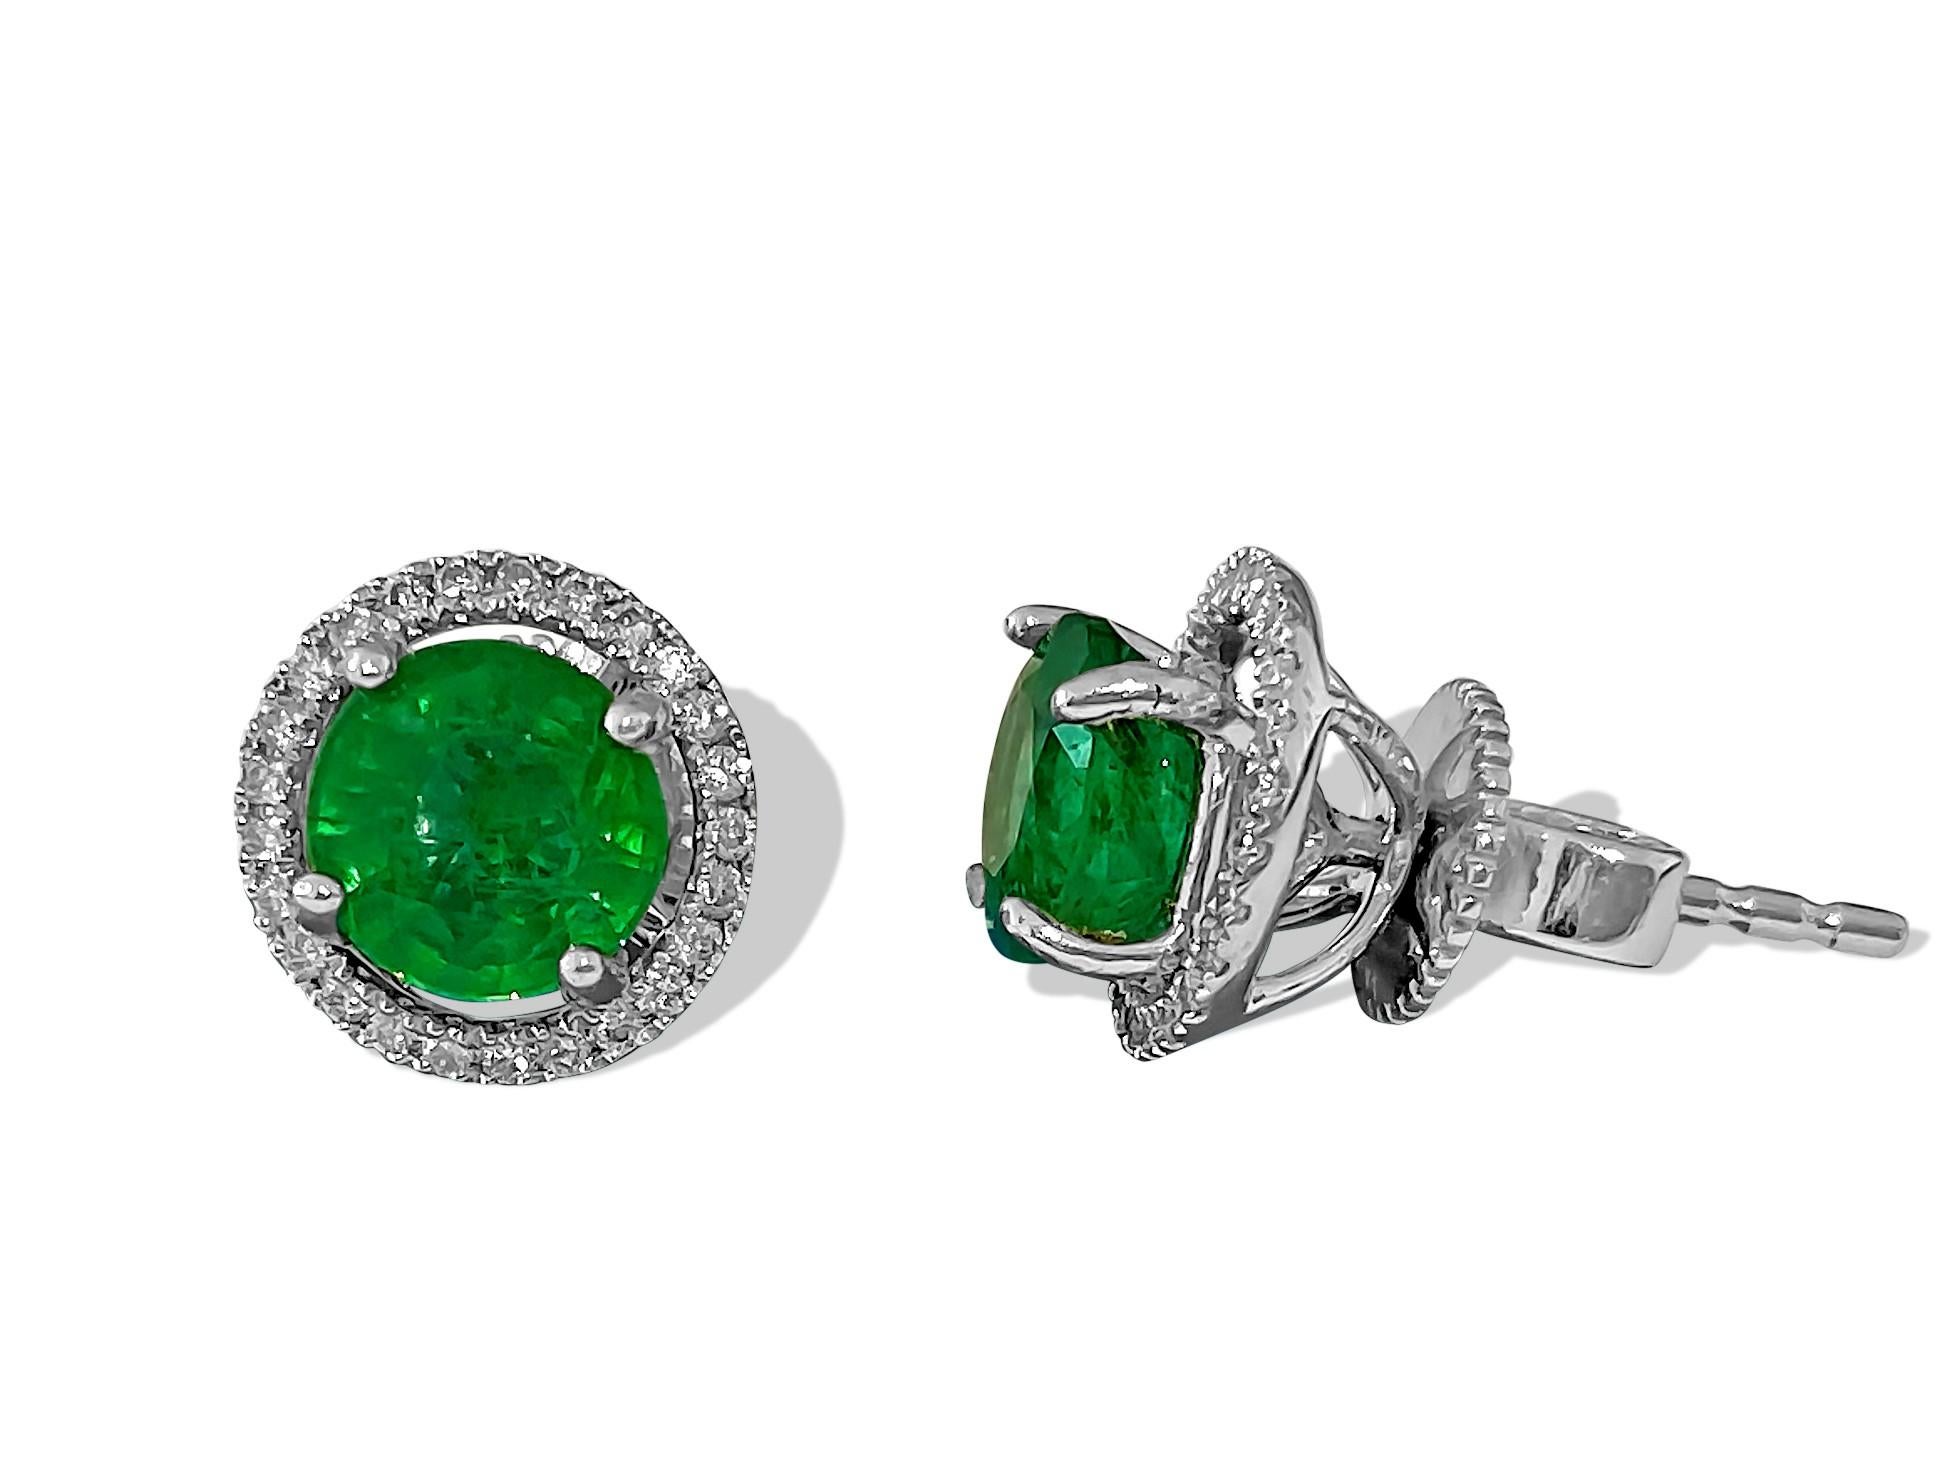 Elegant and timeless, these sublime earrings crafted in 14k white gold feature 0.50 carats of G color, VS clarity diamonds, and 2.00 carats of round-shaped, natural earth-mined emeralds. Perfect for special occasions, these stunning earrings